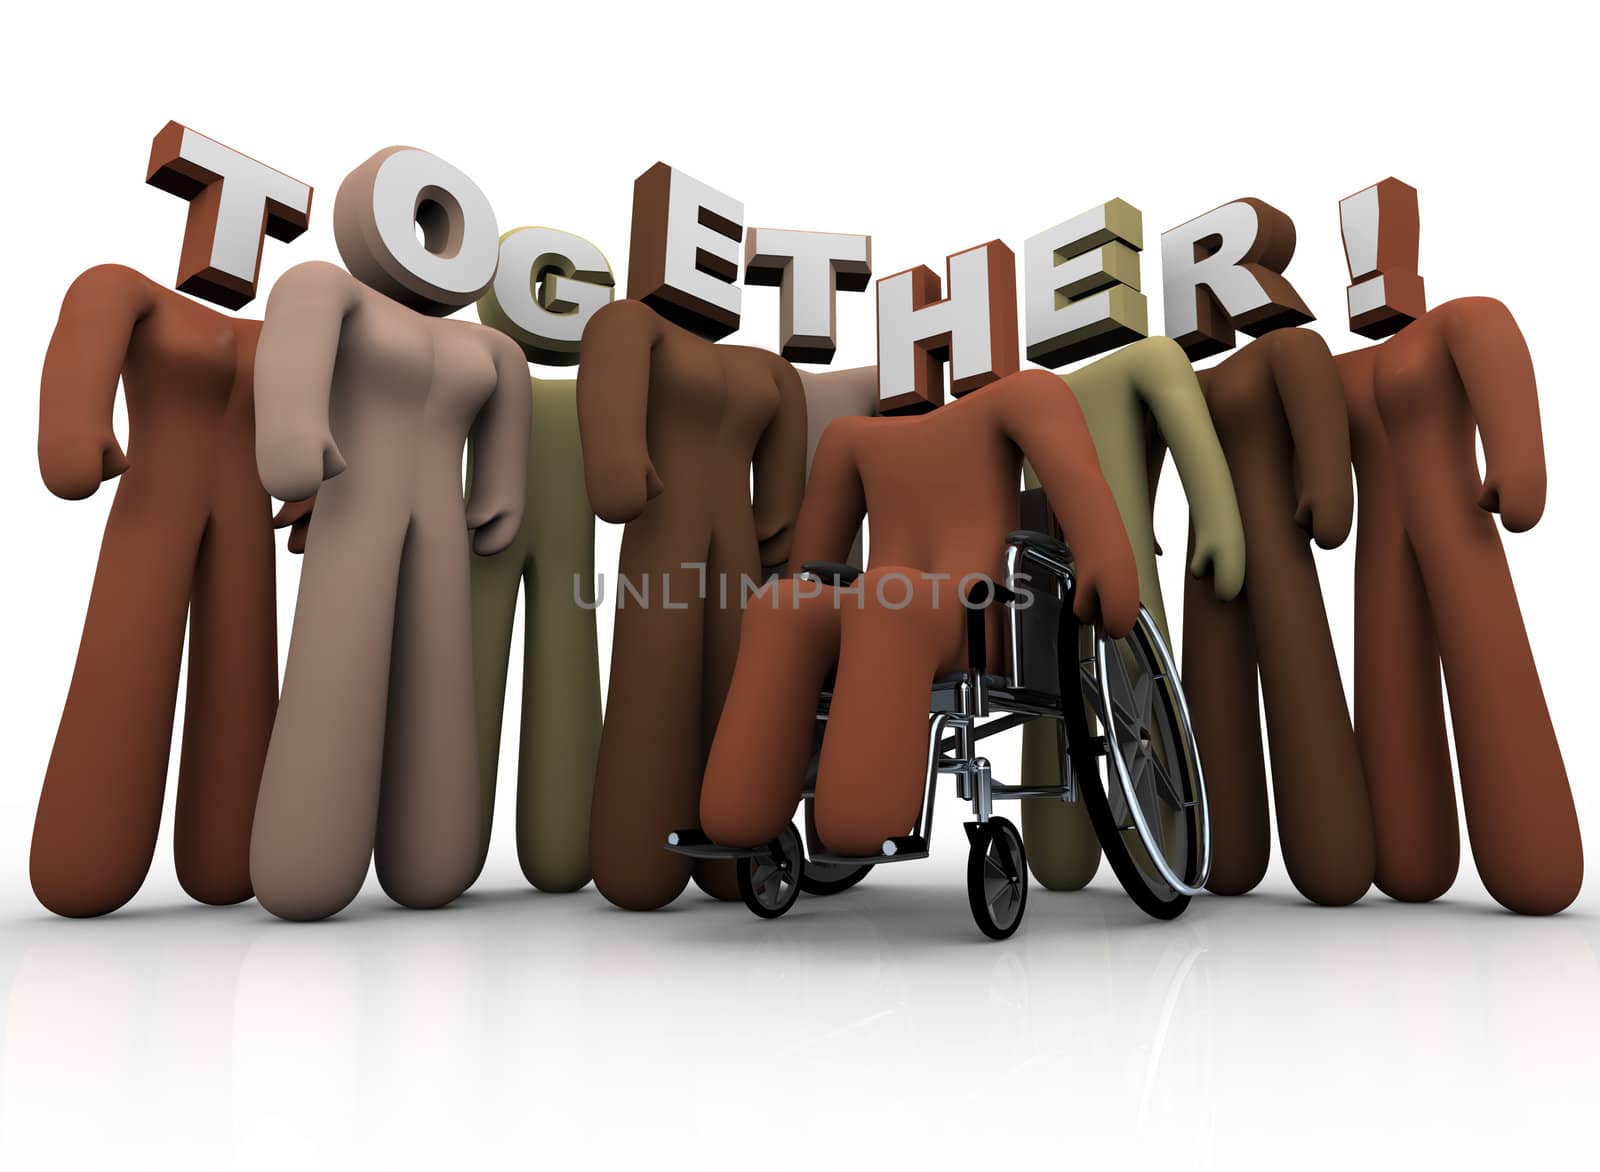 Several people of diverse backgrounds stand with the word Together in letters for their heads, with one in a wheelchair, symbolizing community, friendship and teamwork